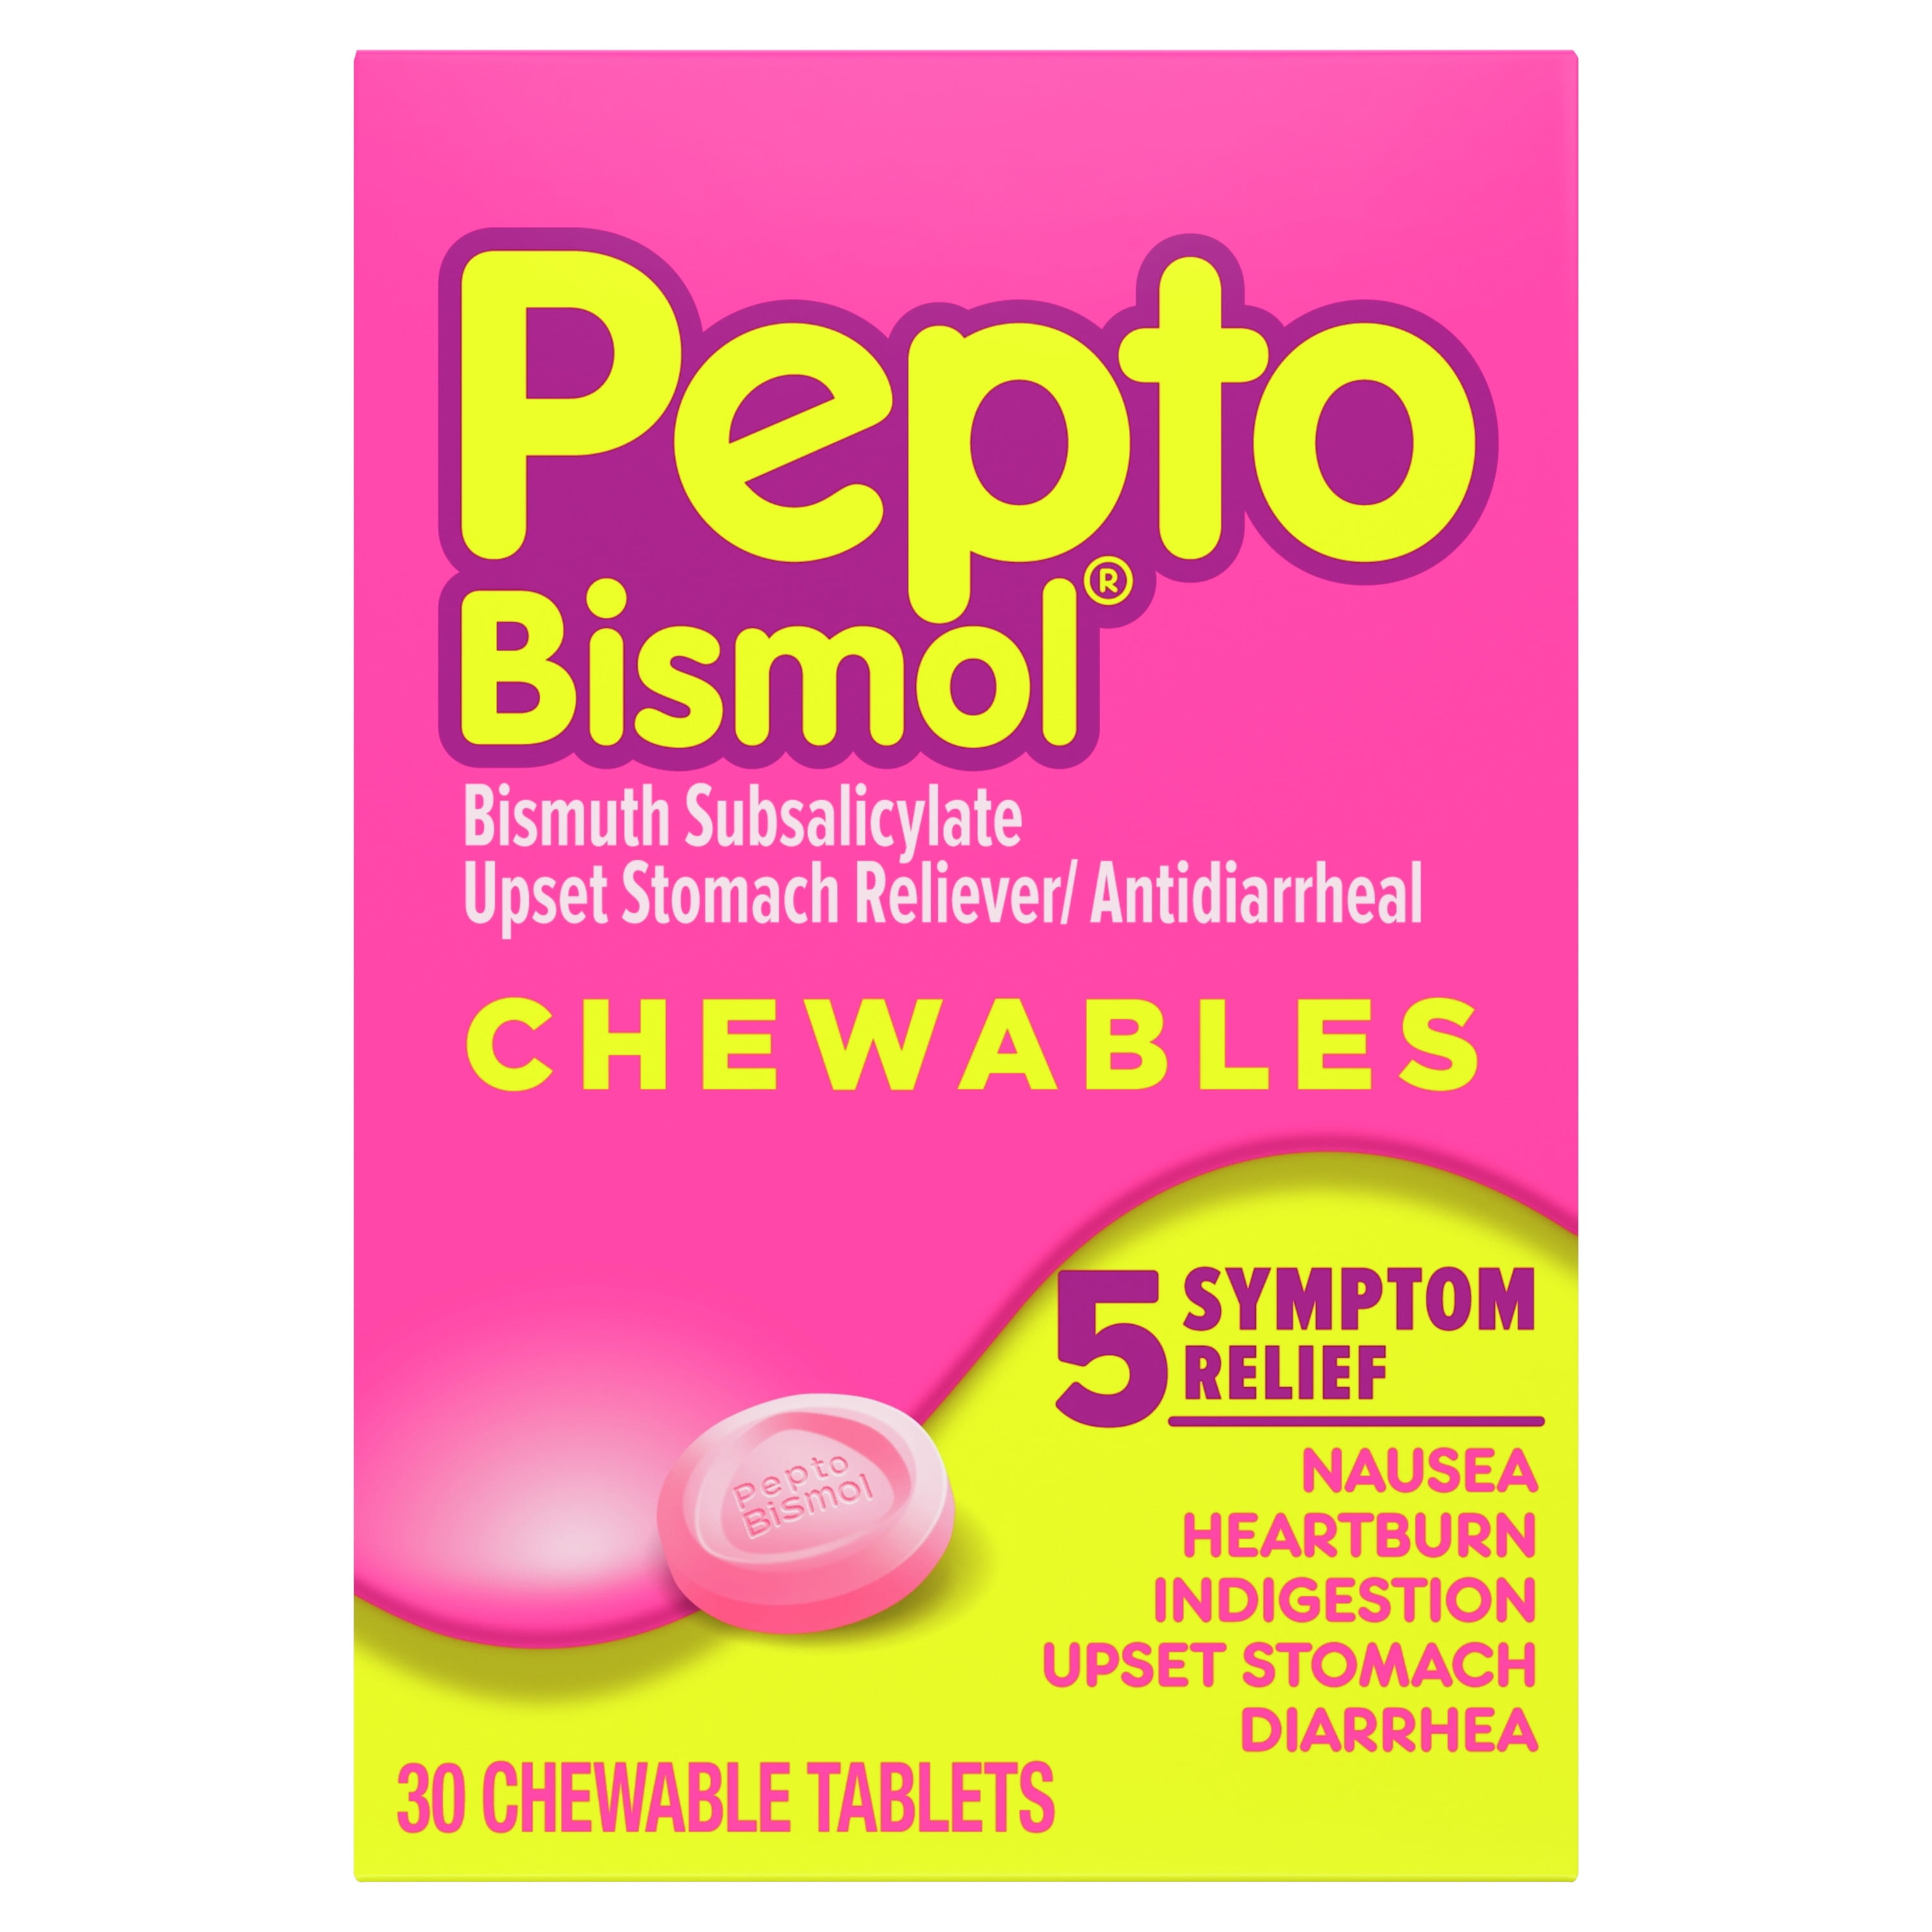 Pepto Bismol Chewable Tablets for Upset Stomach & Diarrhea Relief, Over-the-Counter Medicine, 30 Ct